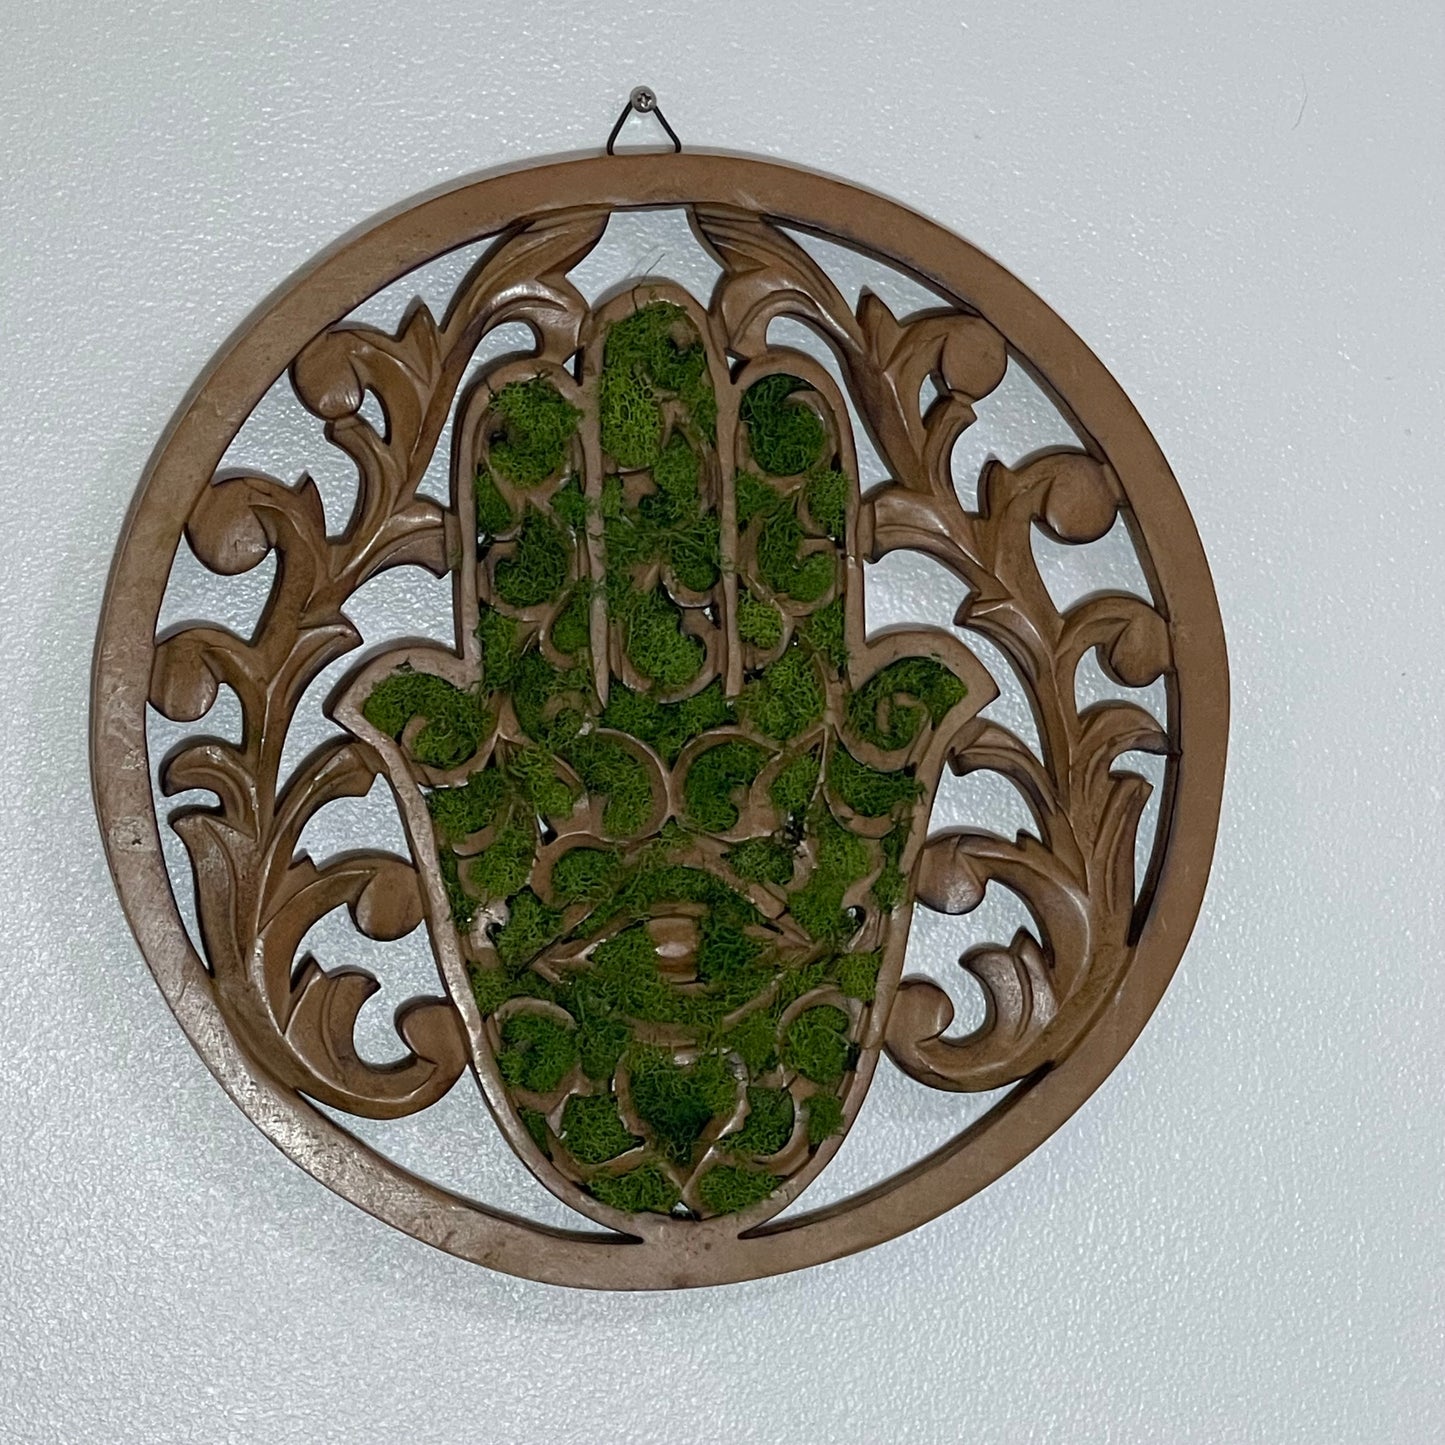 Handcrafted Moss Hamsa Fatima Hand Decor For Home Blessings Protection Rustic Wall Mounted Art